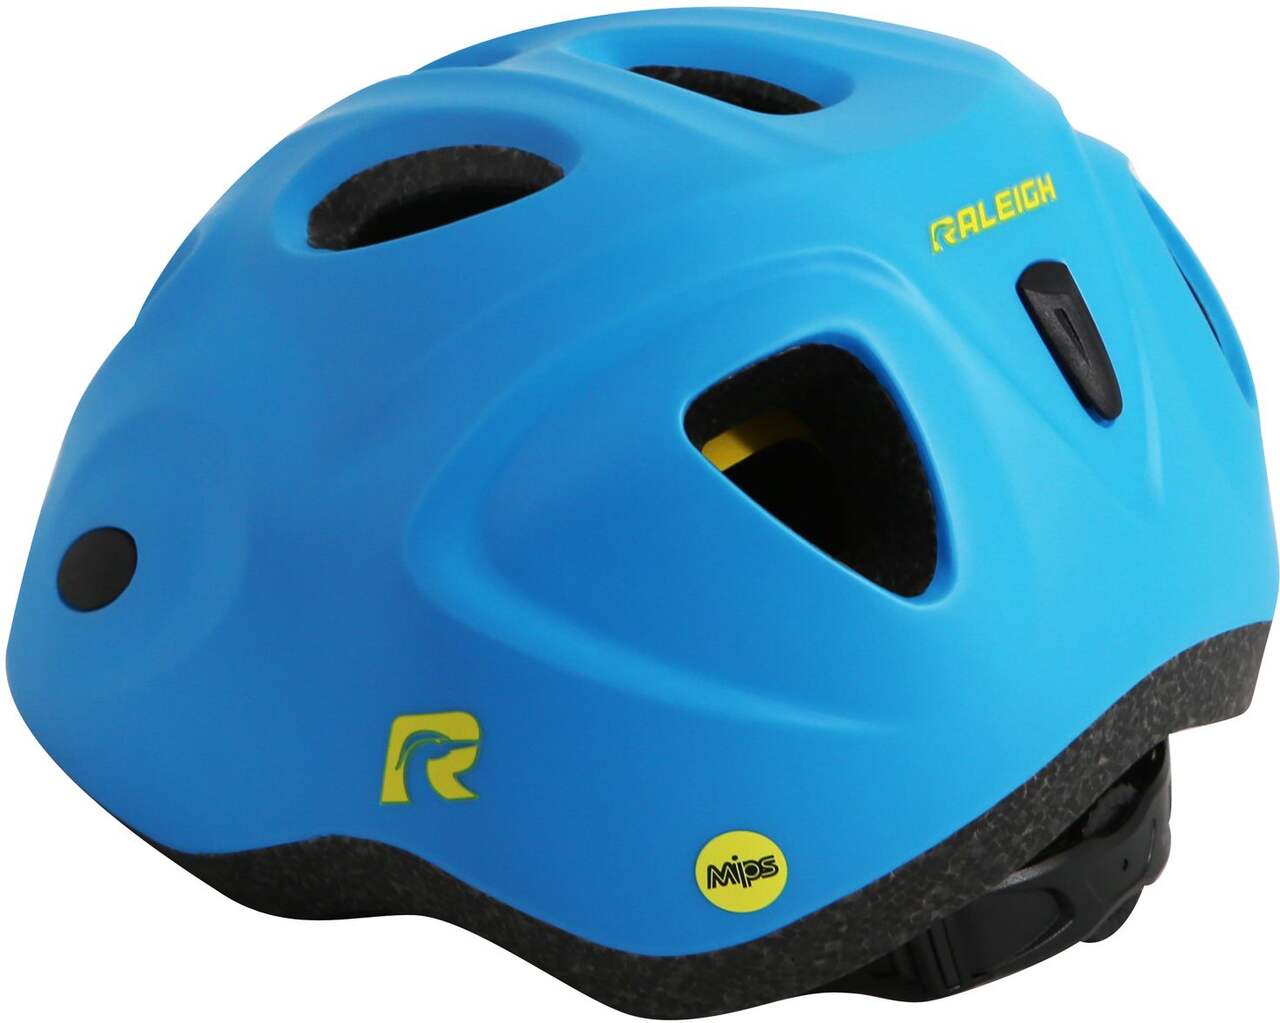 Pacific Cycle Recalls Infant Bicycle Helmets Due to Choking and